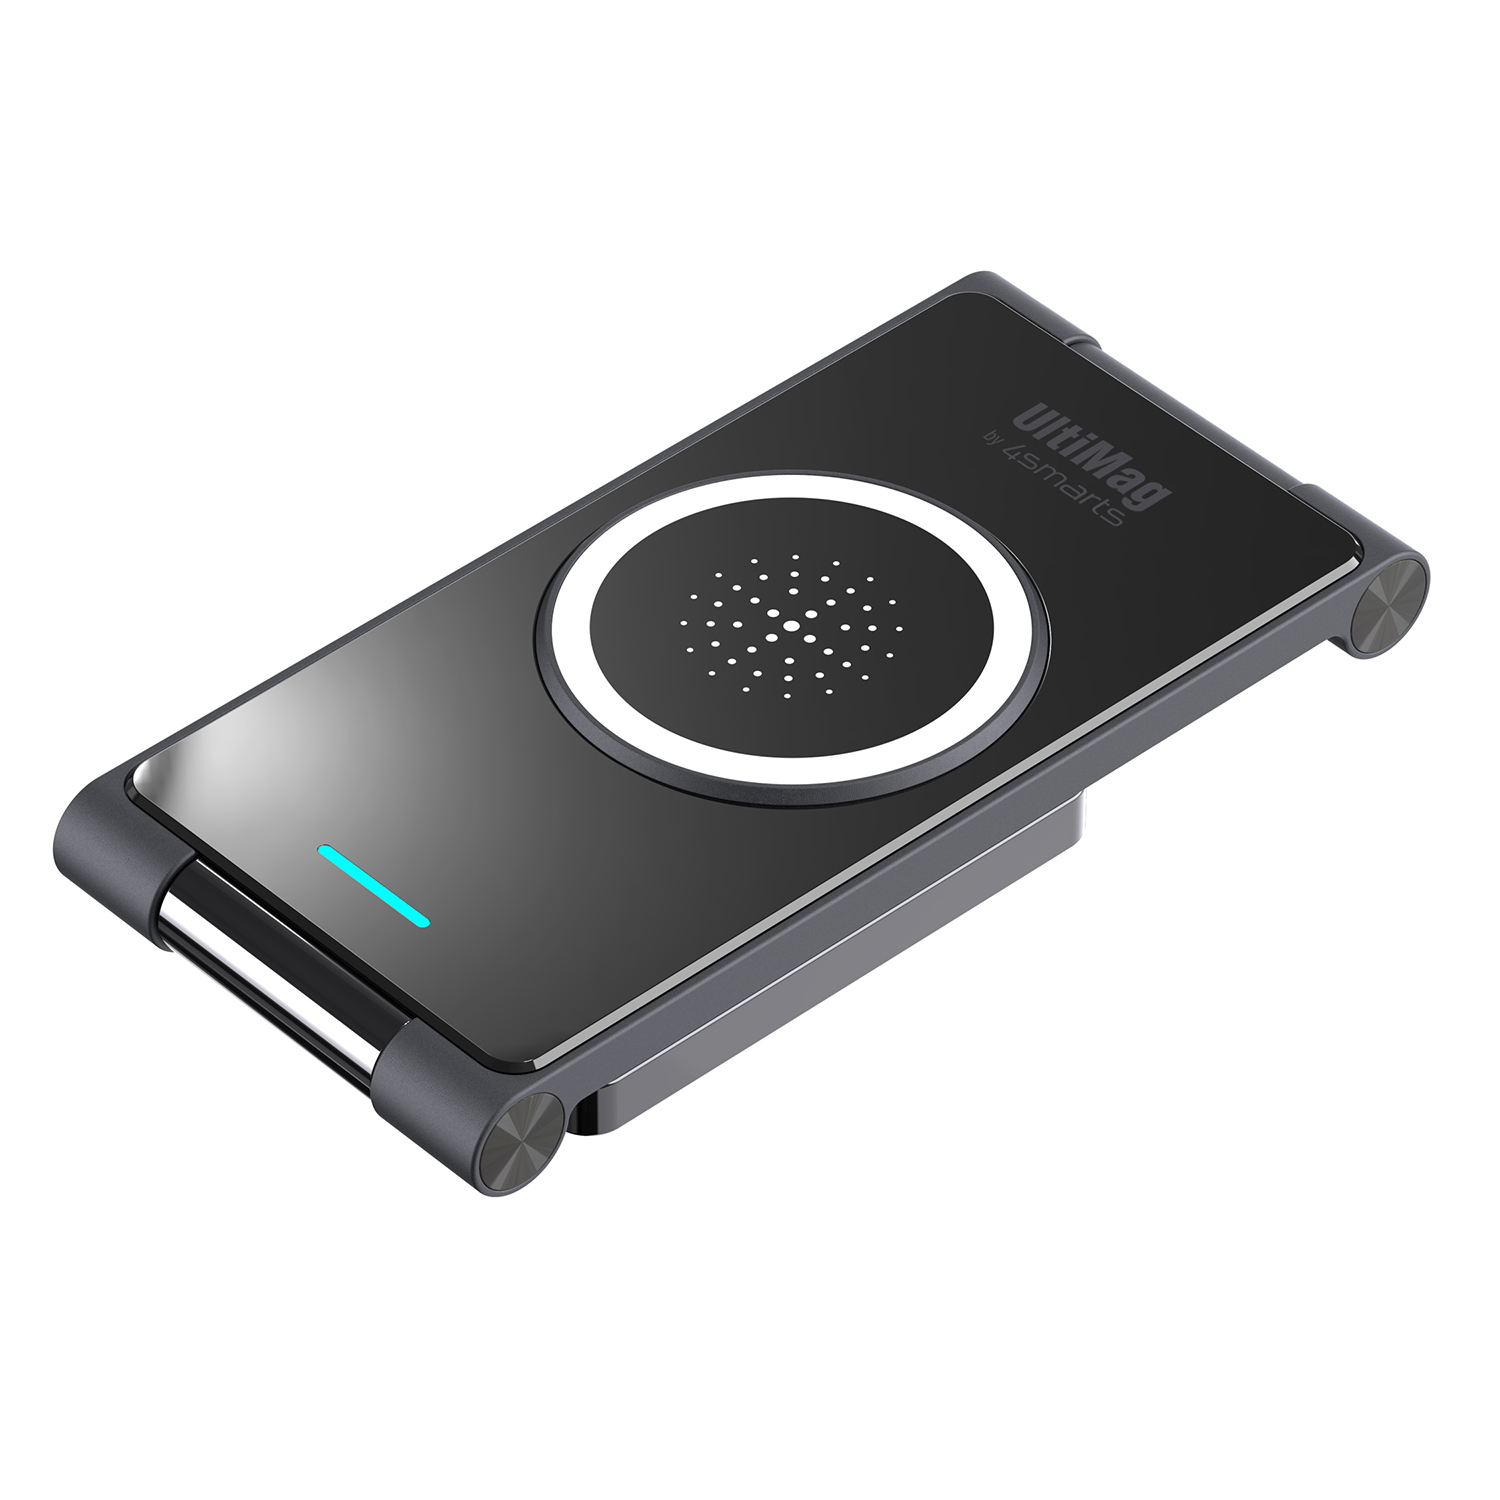 4SMARTS Wireless Charger UltiMag Mehrfarbig Wireless Universal, Charger 22,5W TrioFold schwarz